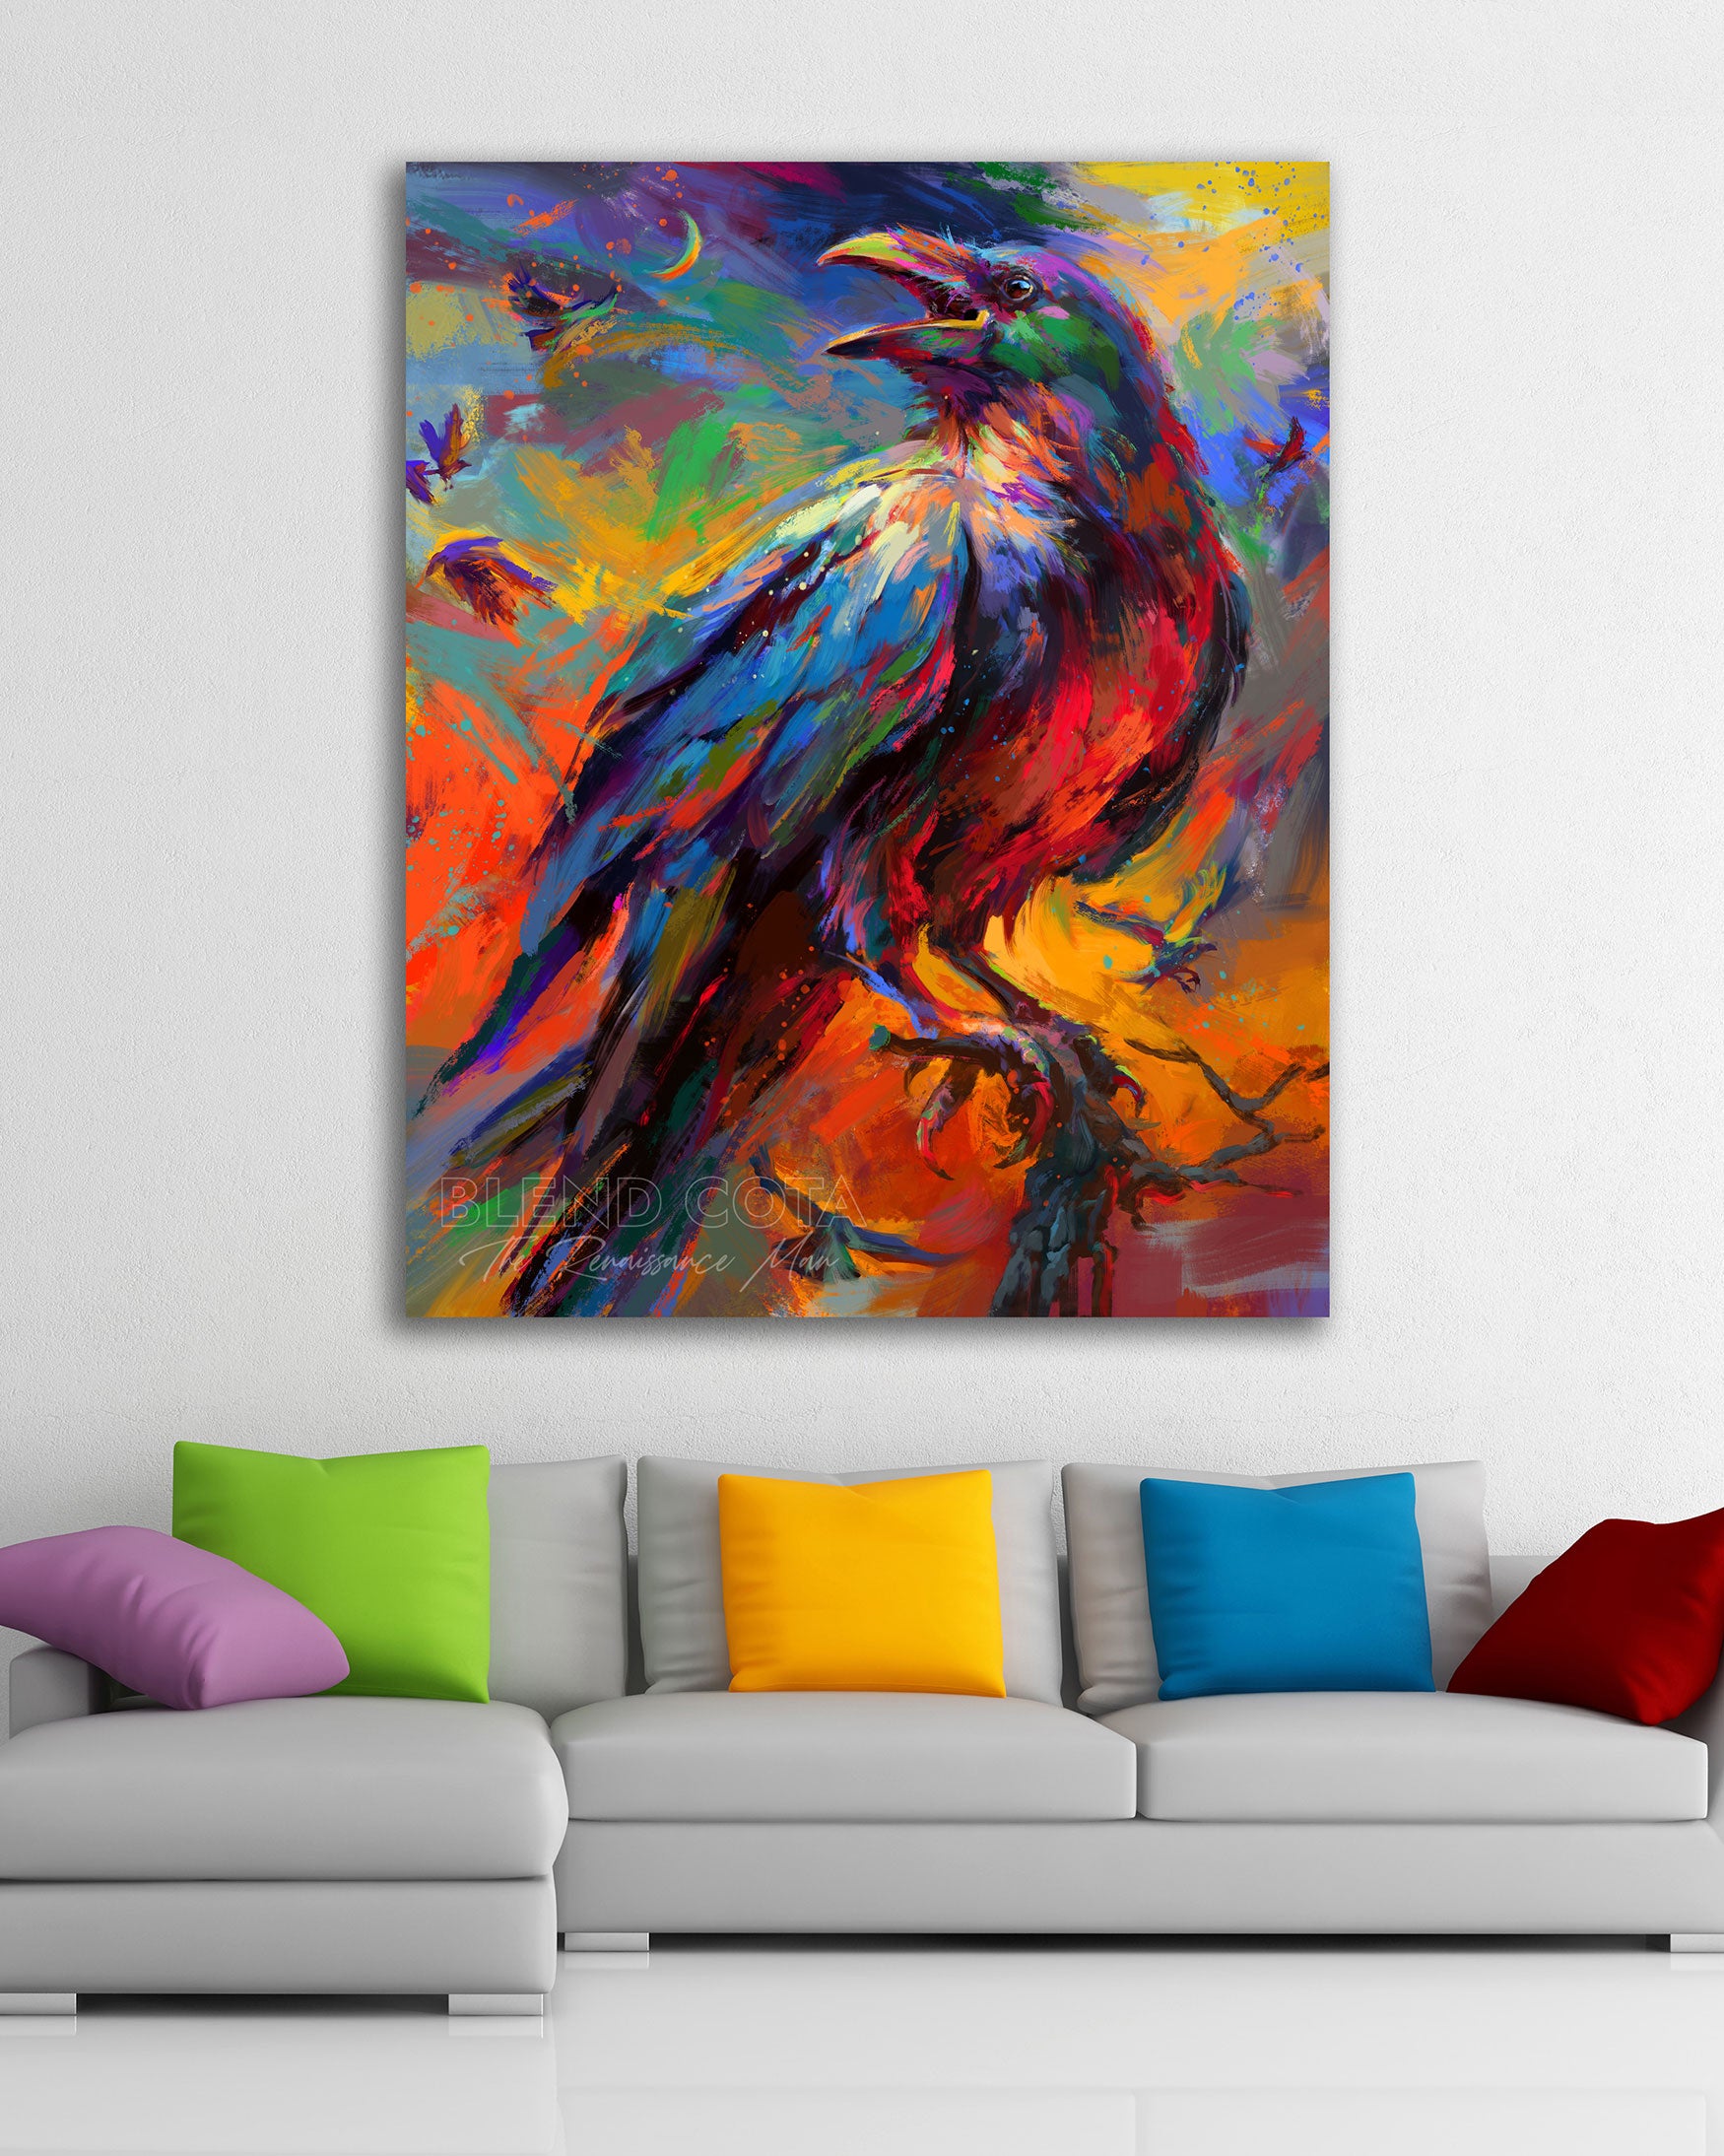 Oil on canvas painting of Raven, standing on a branch surrounded by a background of smaller birds in motion, treated with colorful brushstrokes. shown in room above couch